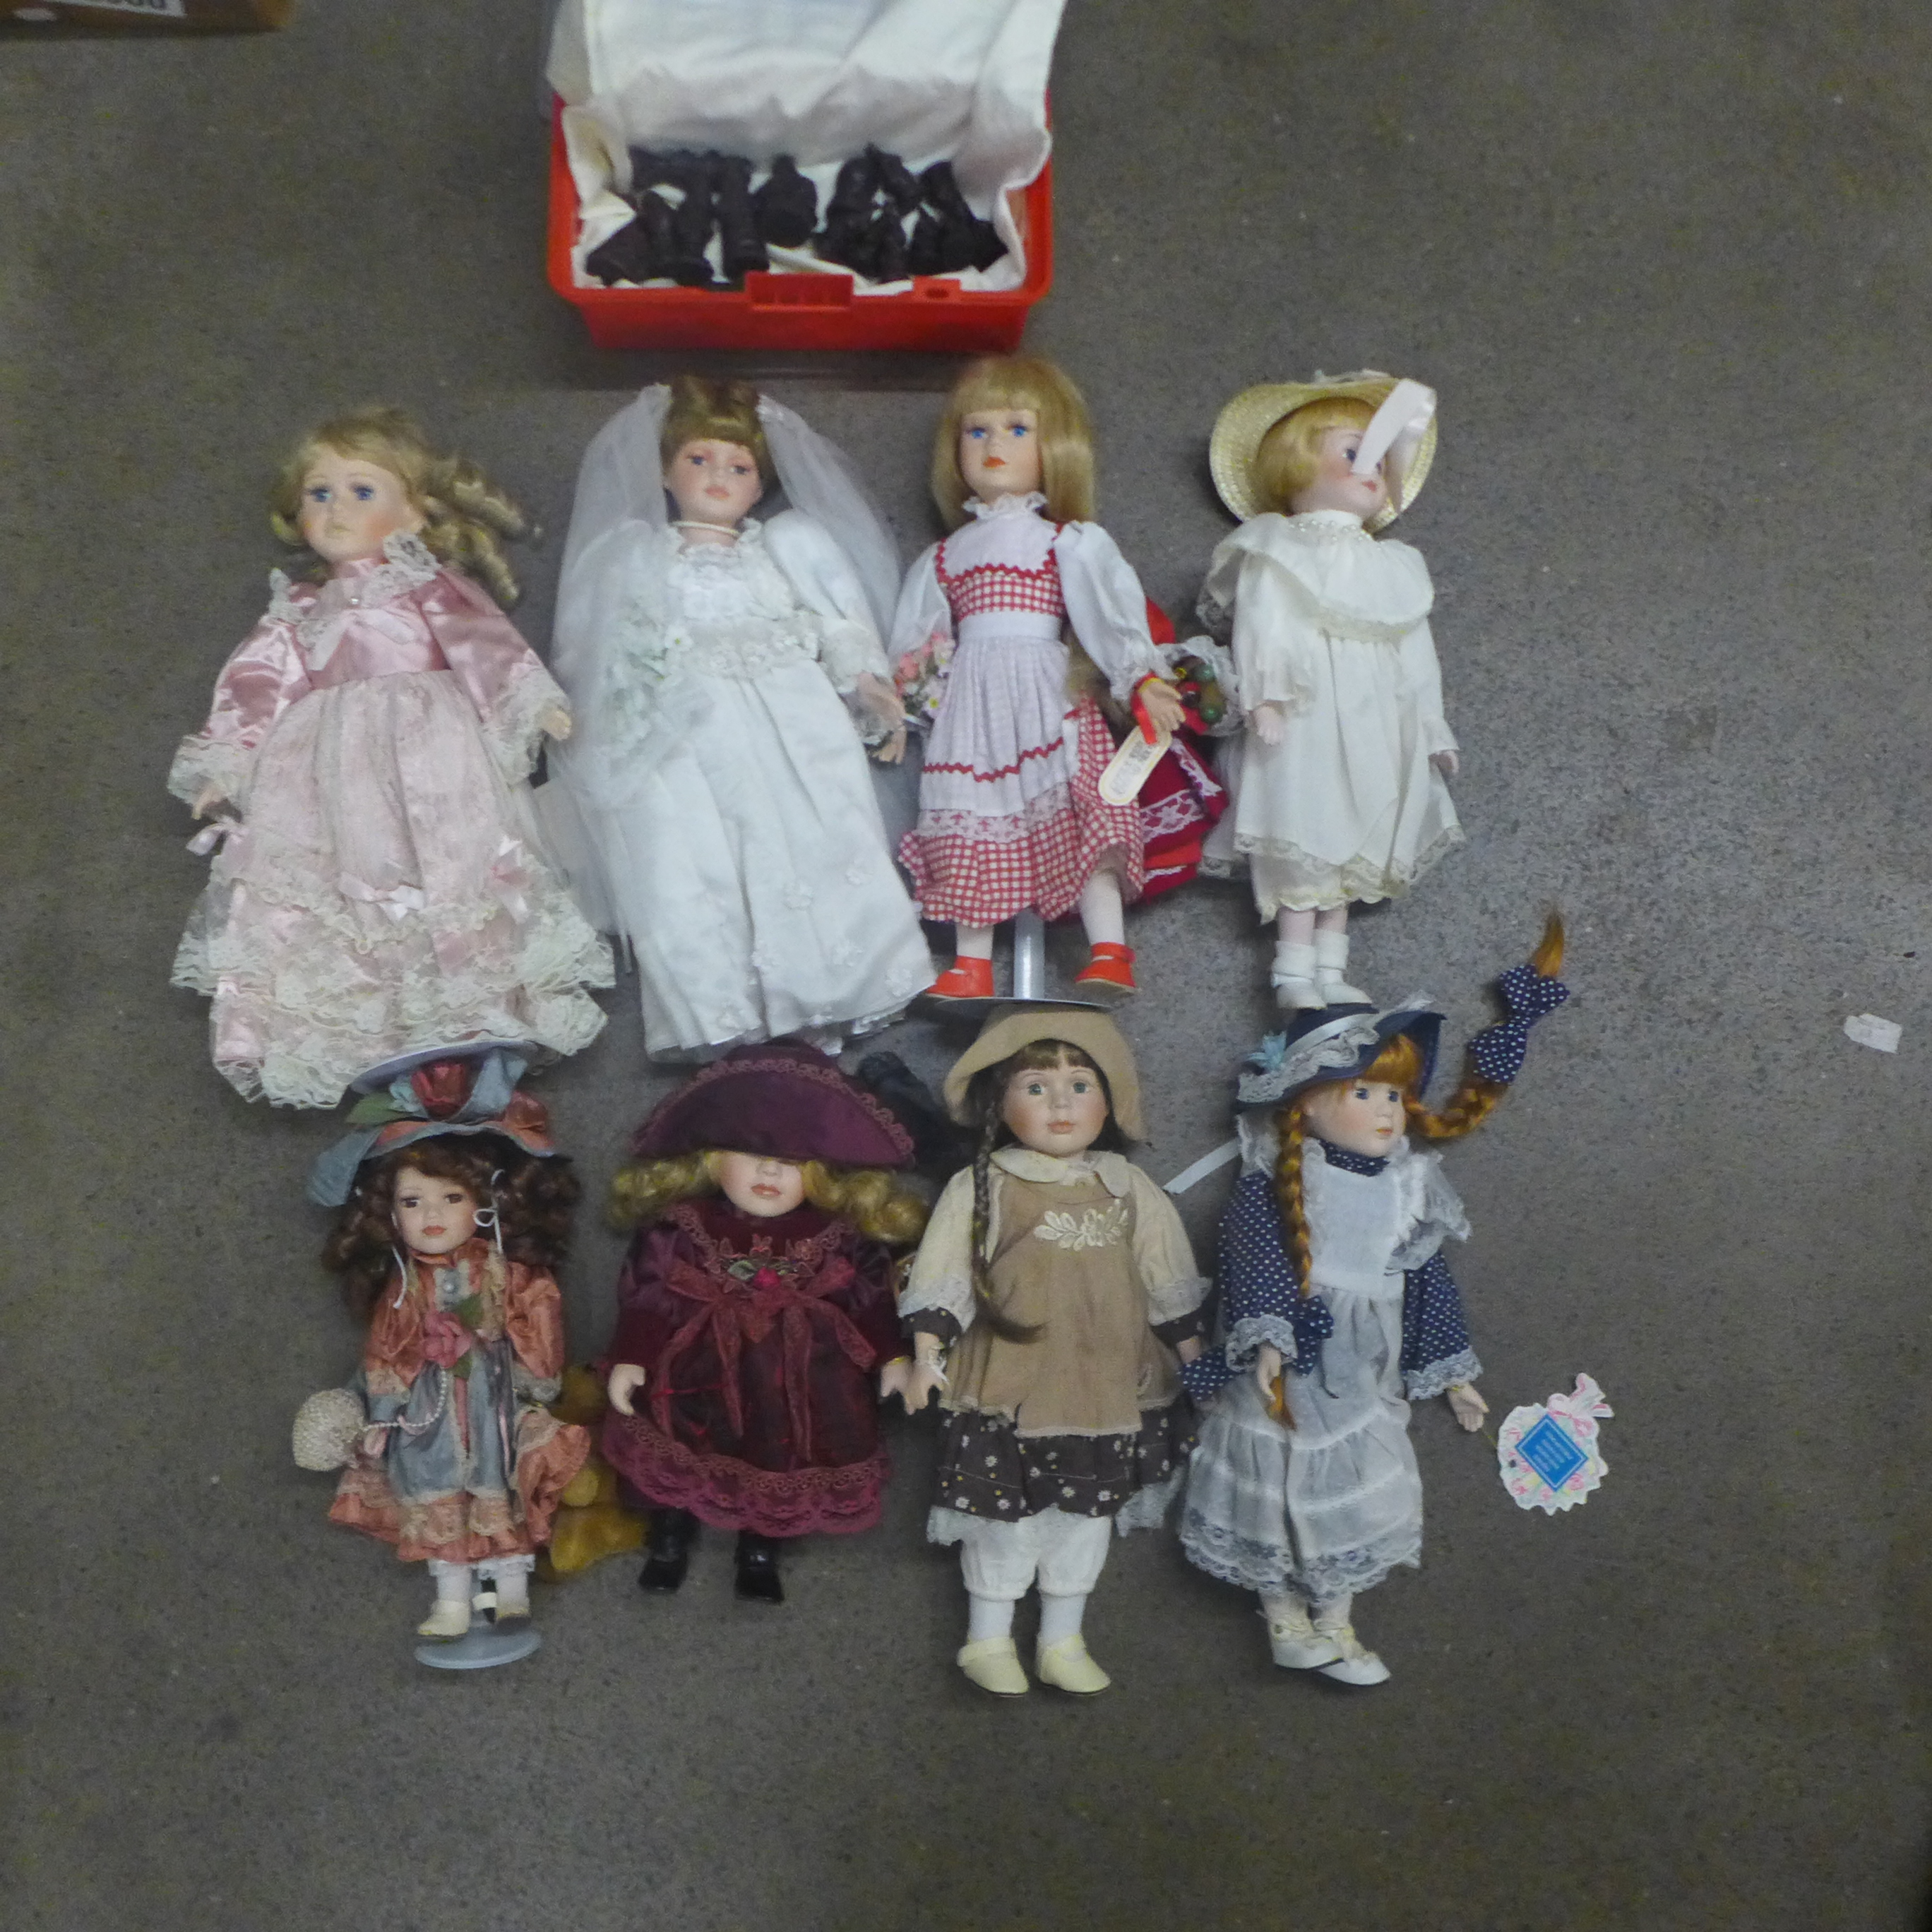 Two bags of Leonardo dolls and a set of Alice in Wonderland chess pieces, encyclopedias and Ladybird